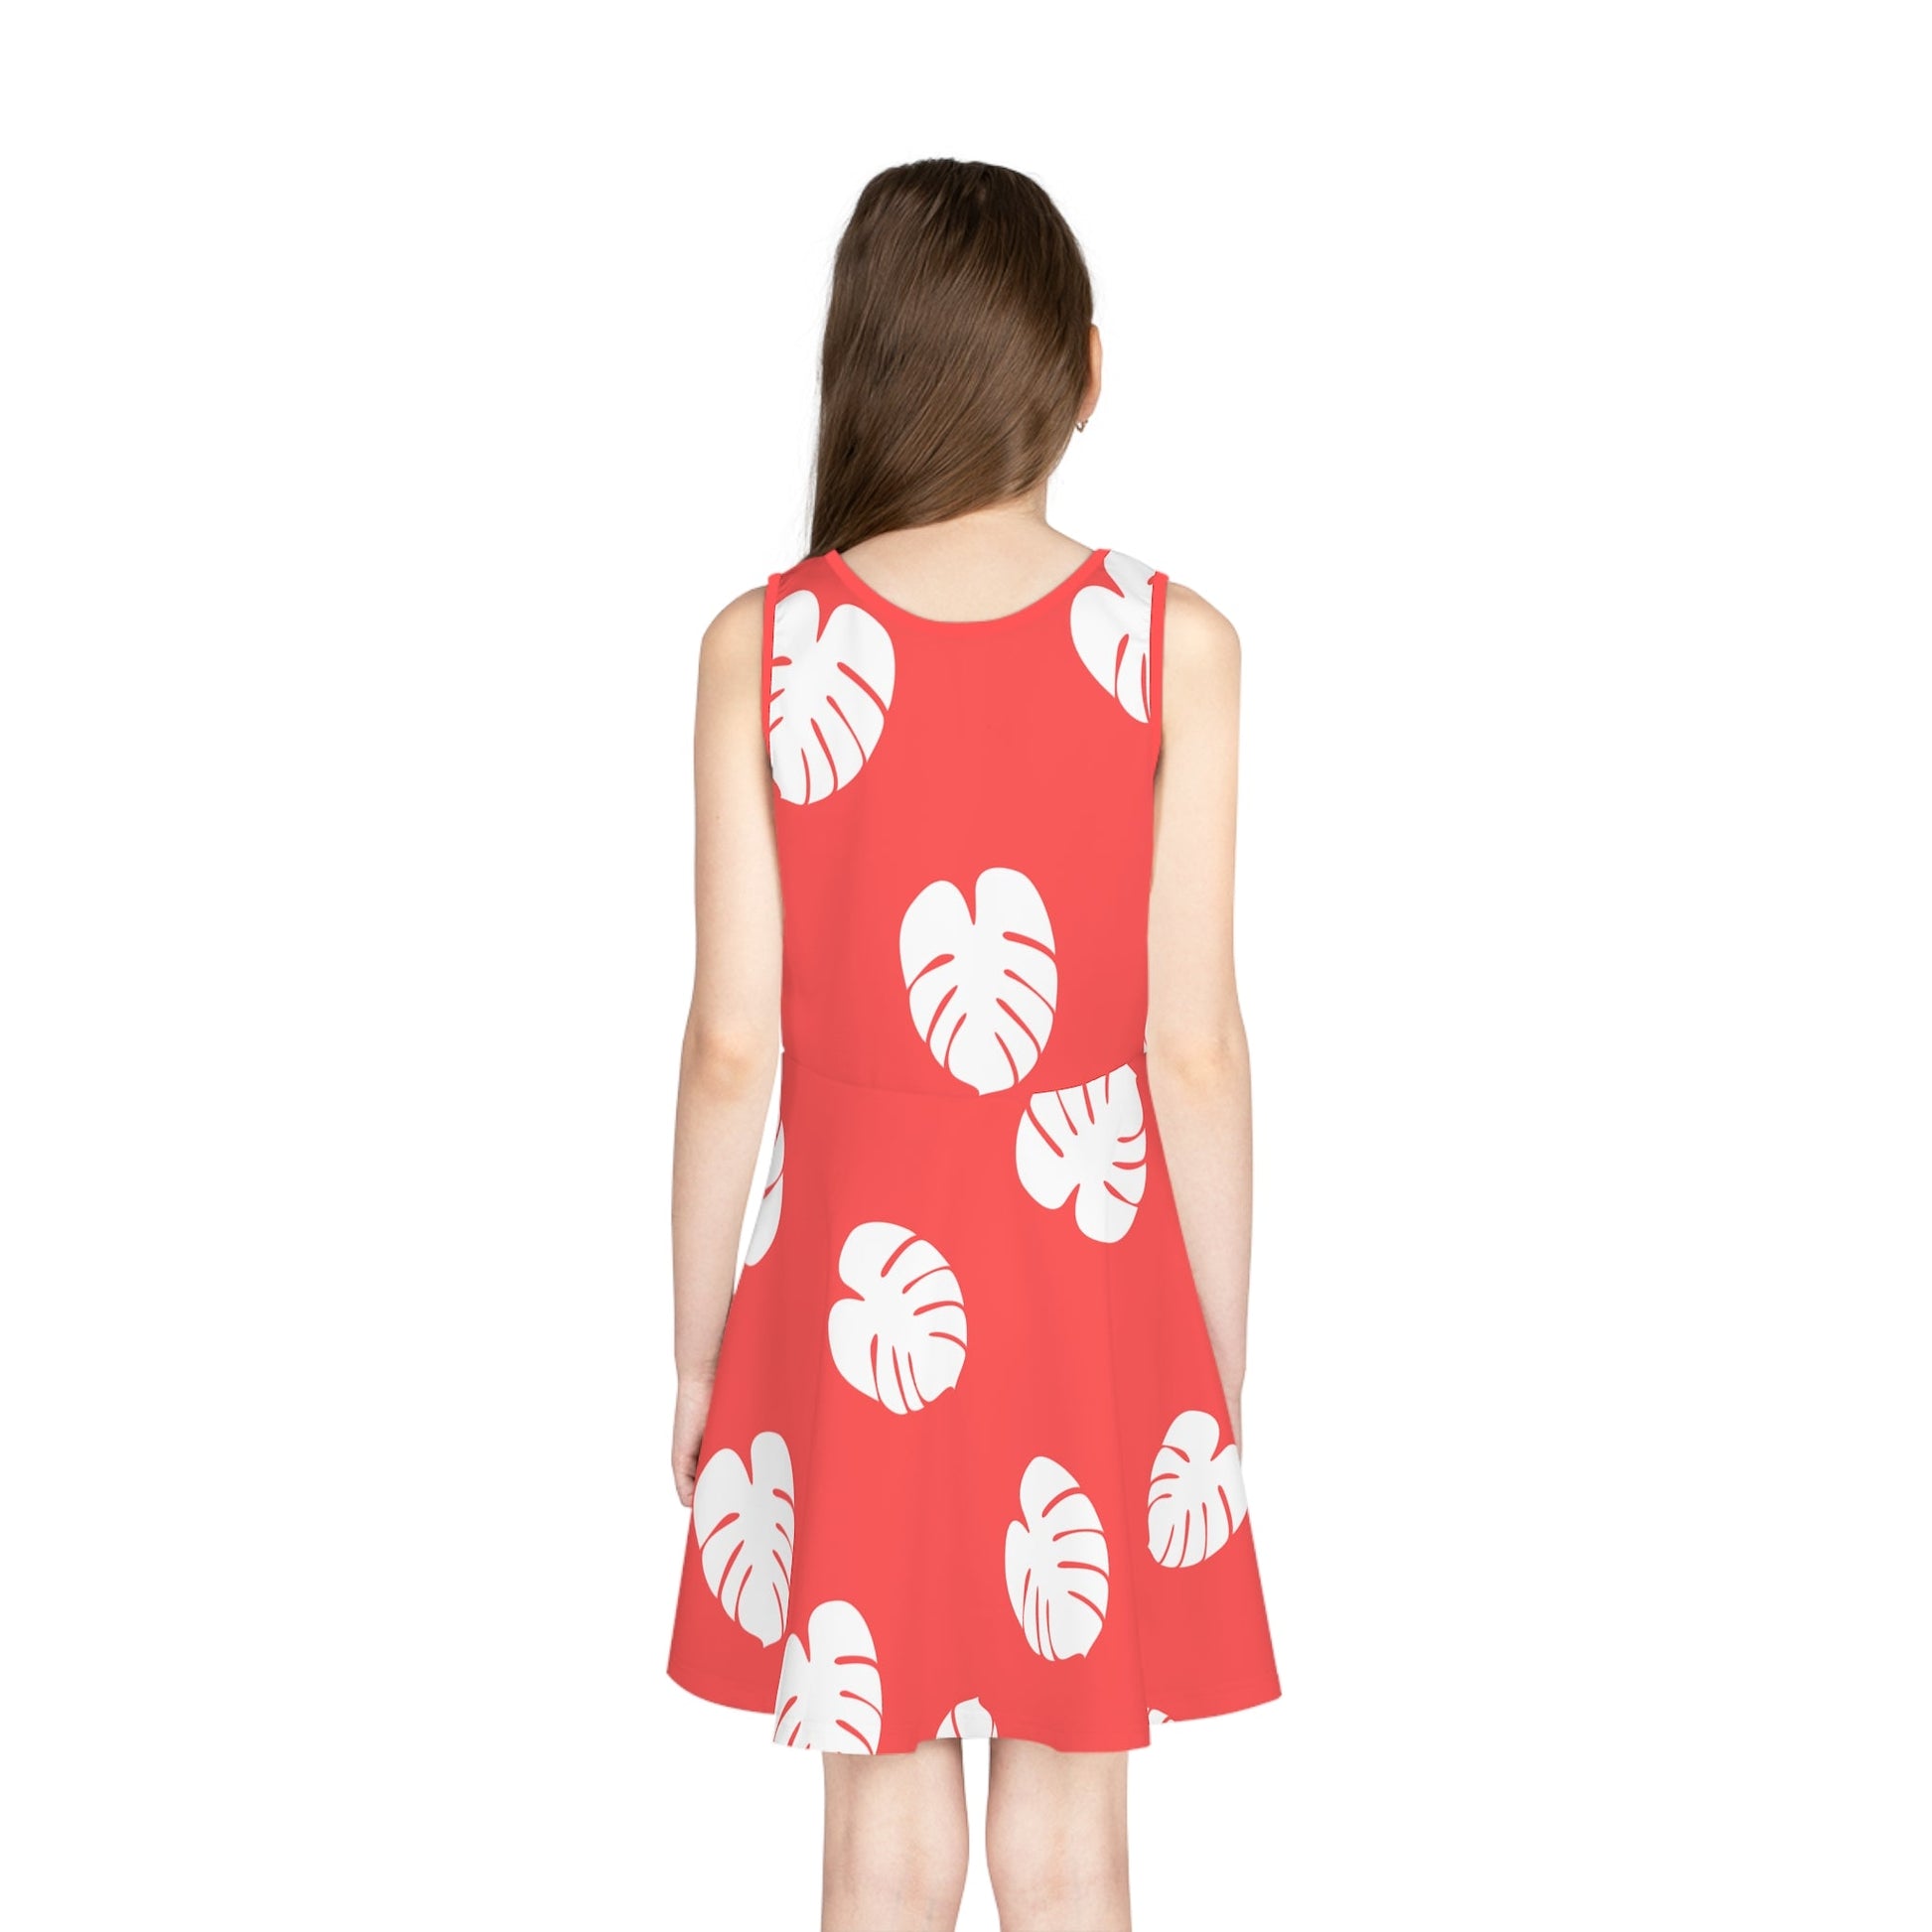 The Lilo Girls' Sleeveless Sundress All Over PrintAOPAOP Clothing#tag4##tag5##tag6#